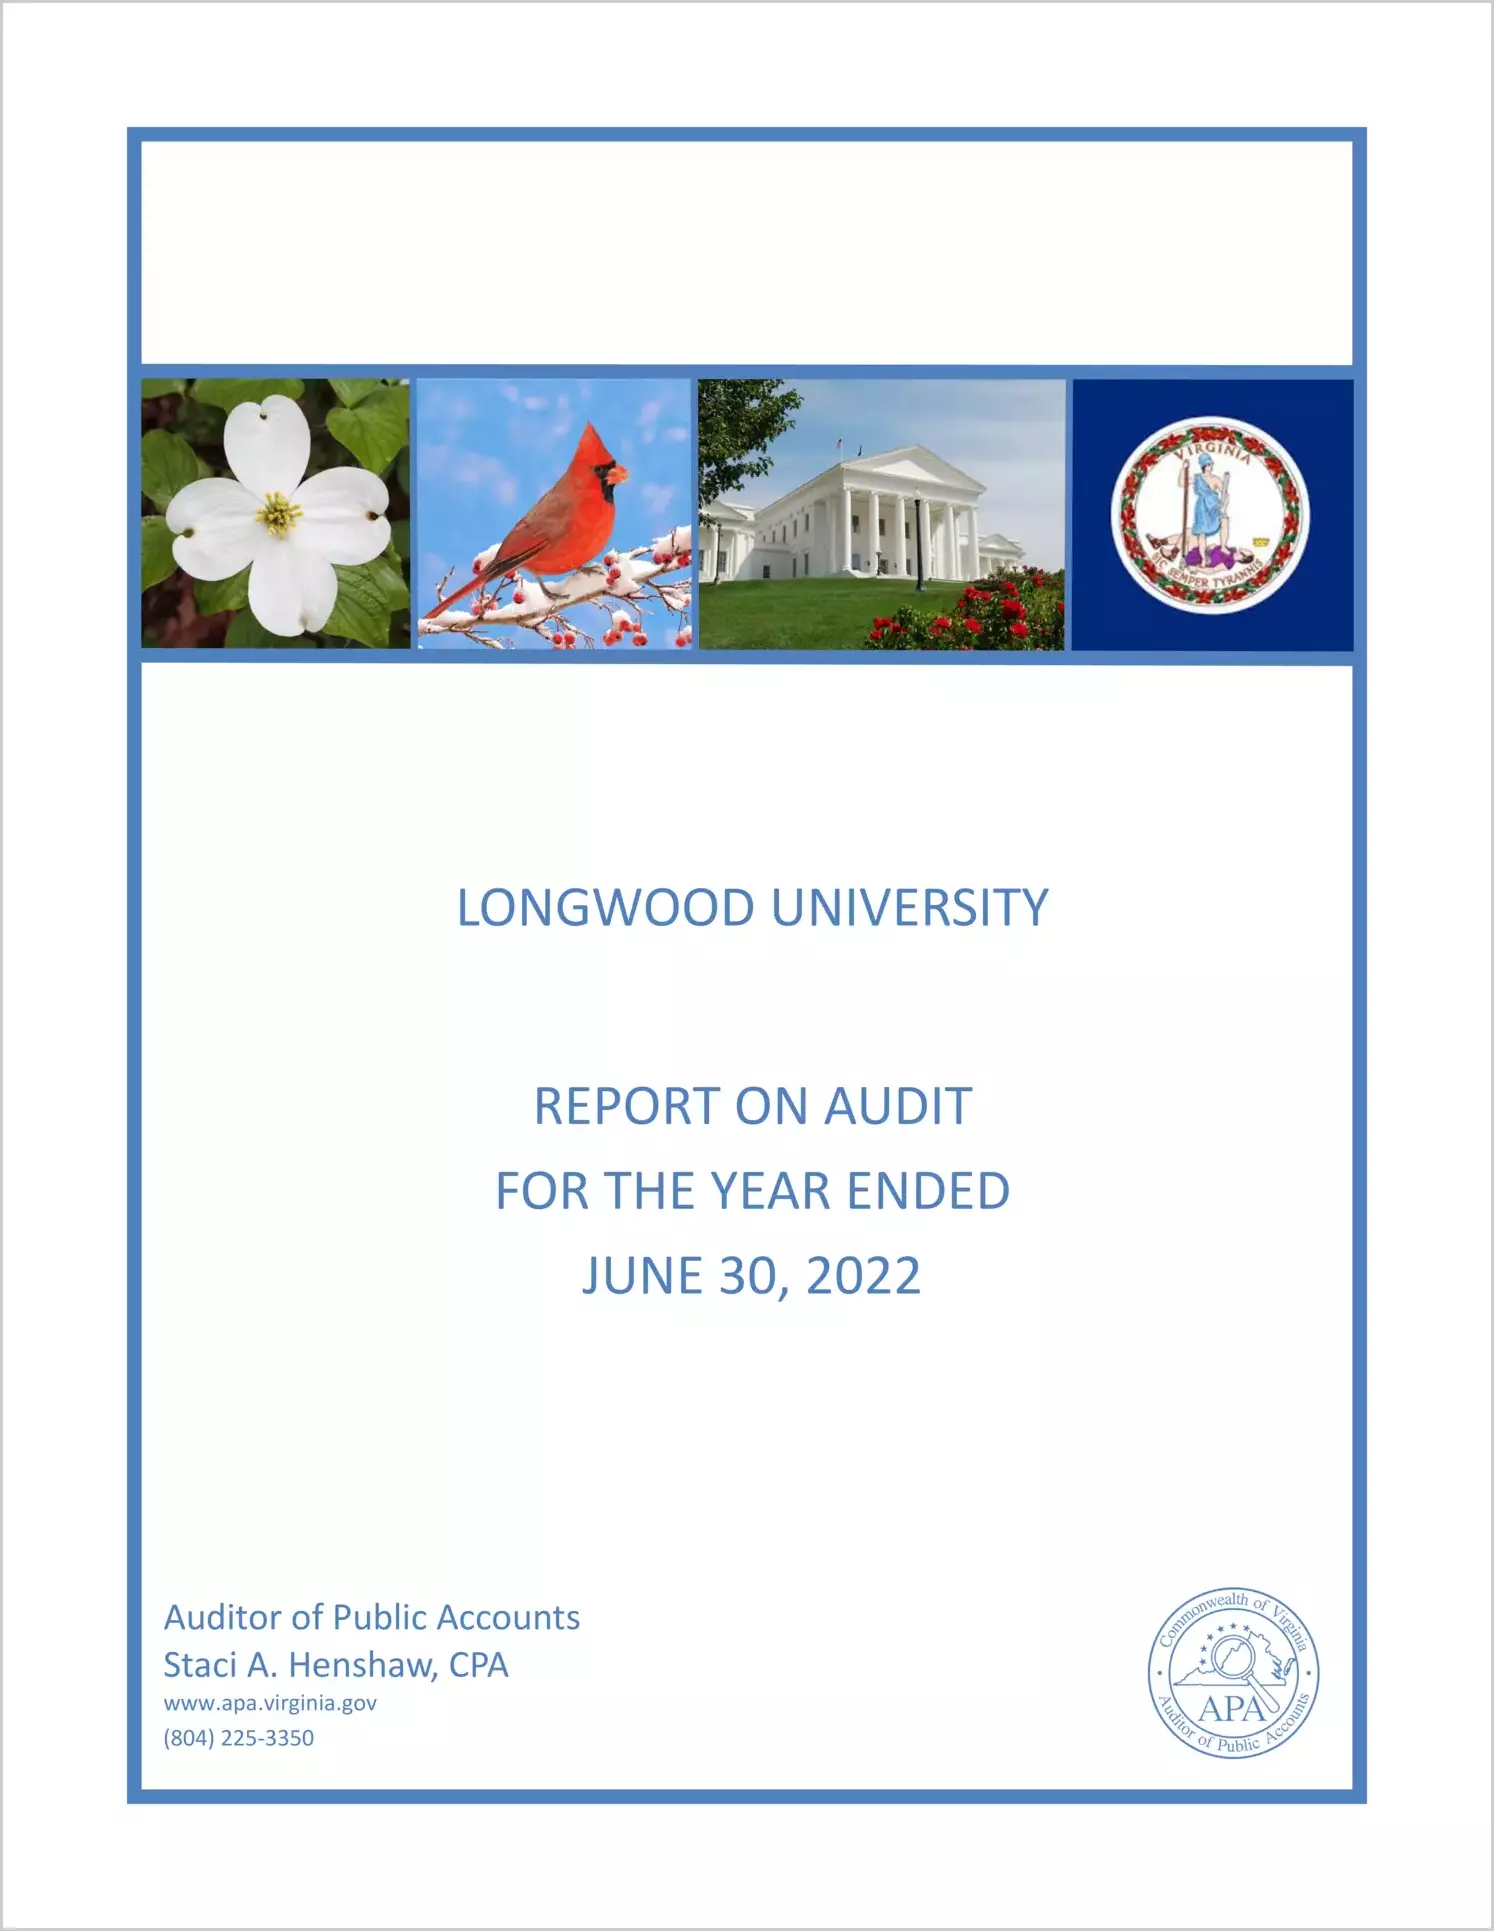 Longwood University for the year ended June 30, 2022